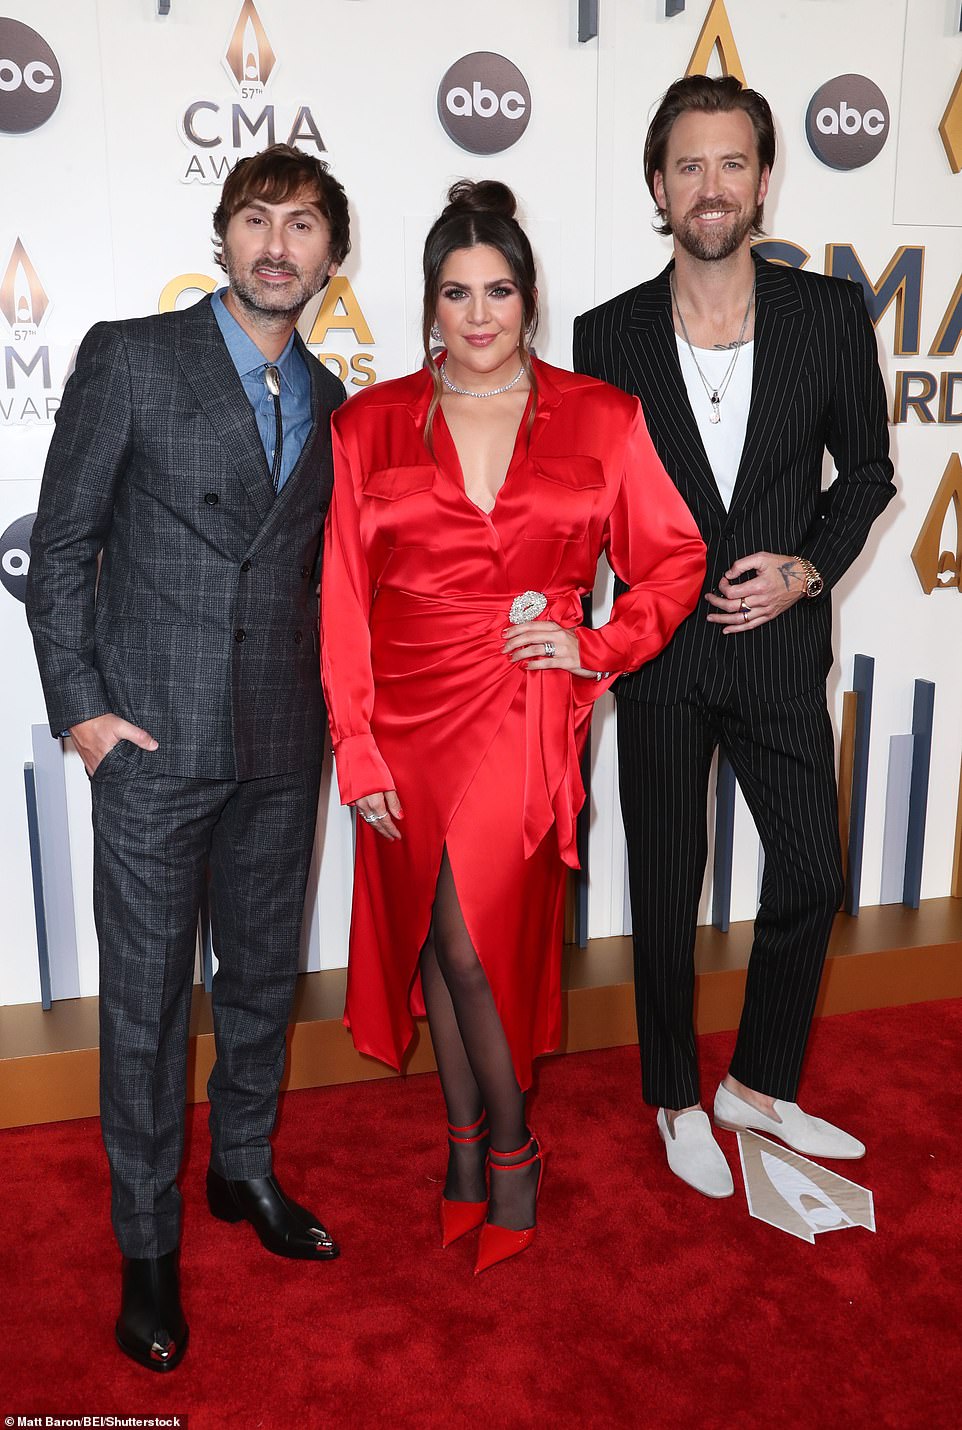 The musical group, Lady A, composed of Hillary Scott, Charles Kelley, and Dave Haywood posed for photos together